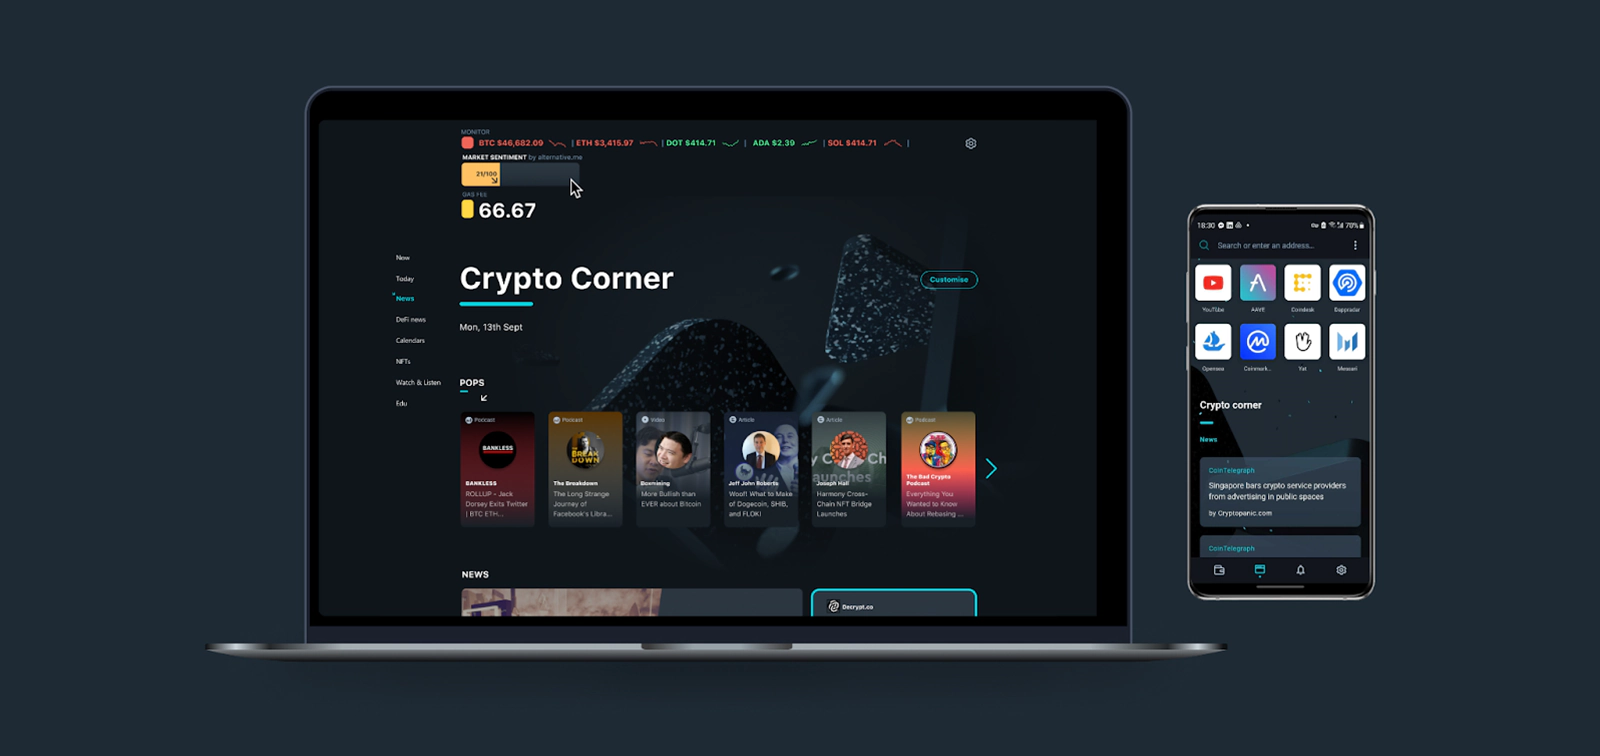 The Crypto Browser with a dedicated Crypto Corner news section